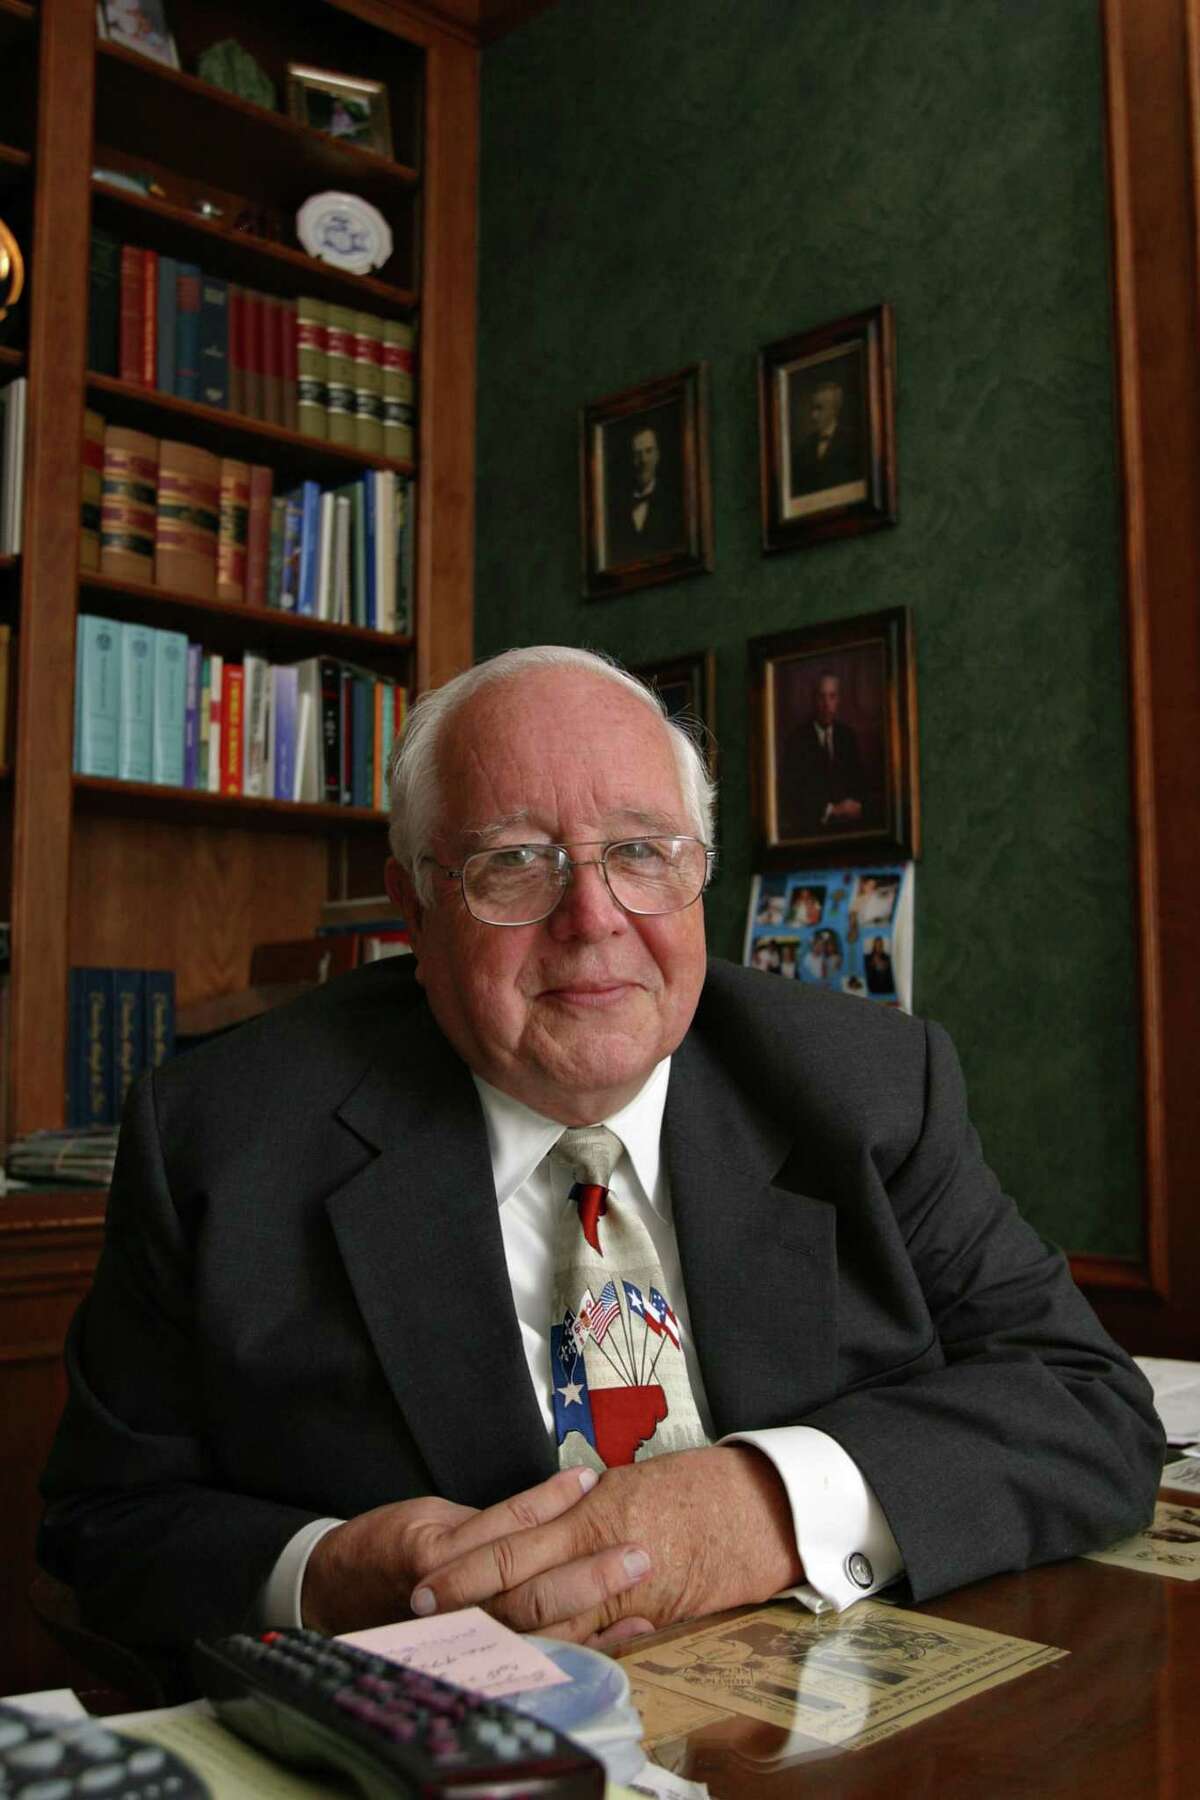 Former Judge Paul Pressler, who played a leading role in wresting control of the Southern Baptist Convention from moderates in 1979, poses for a photo in his home in Houston May 30, 2004. (AP Photo /Michael Stravato)